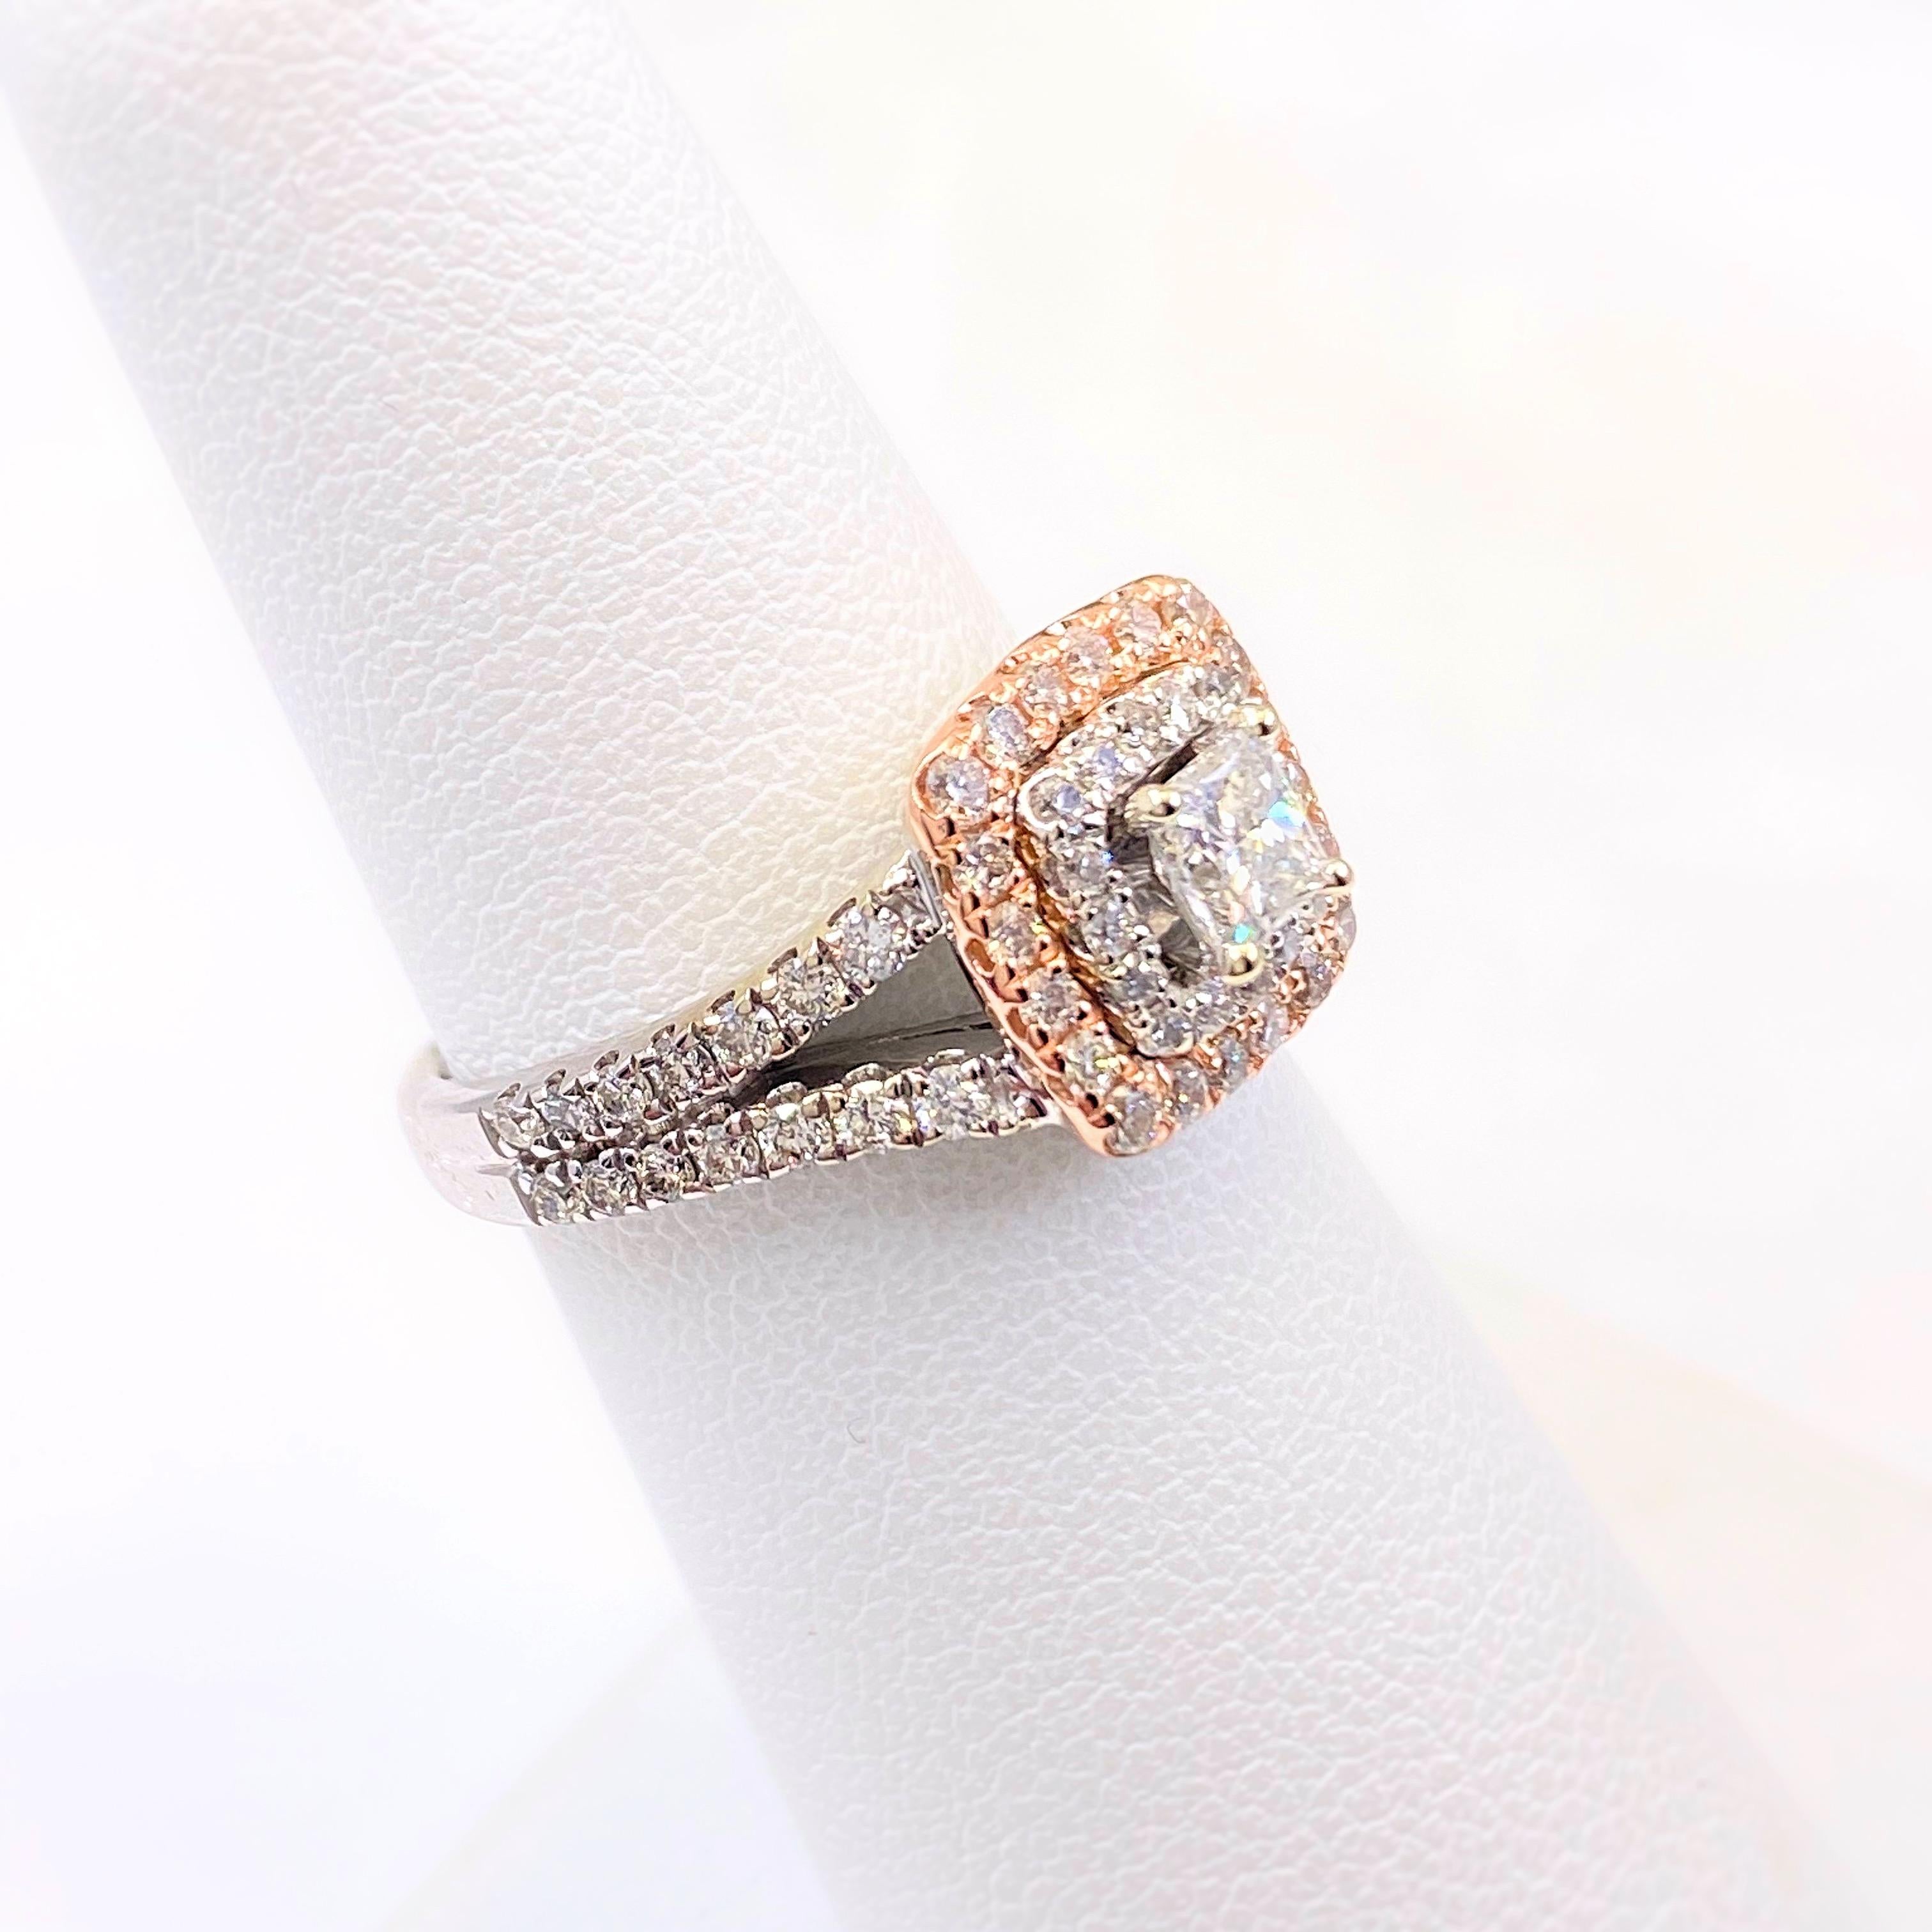 Princess Diamond Double Halo 1.00 Carat Ring 14 Karat White and Rose Gold For Sale 1